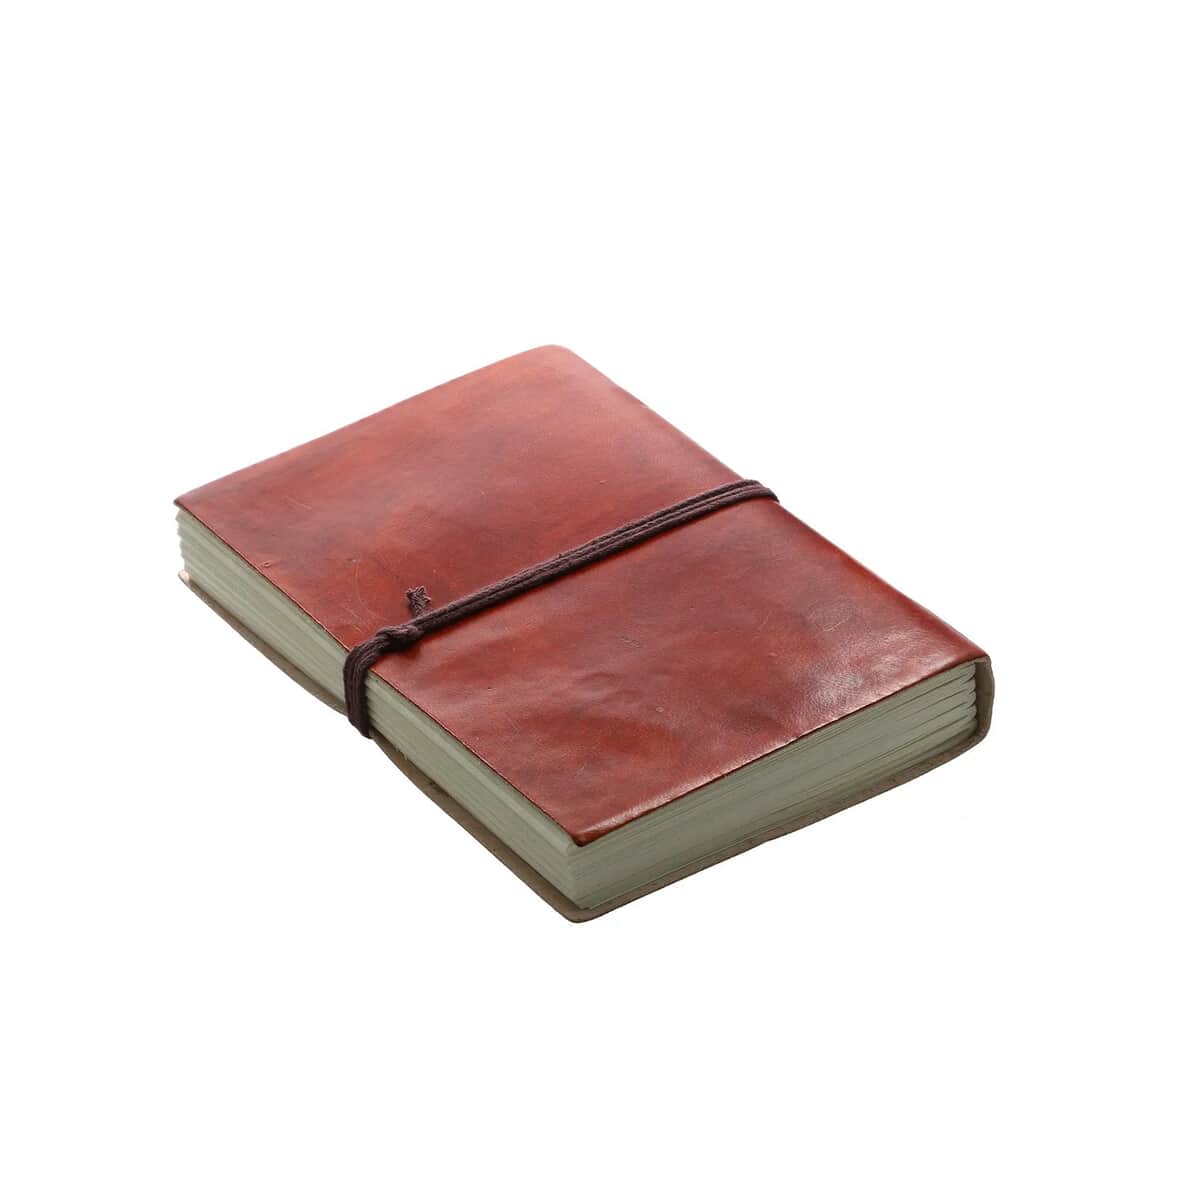 Hand Painted Stitch 100% Genuine Leather Journal With Handmade Papers Size:7(L) x 5(W) Inches   Color: Brown image number 5